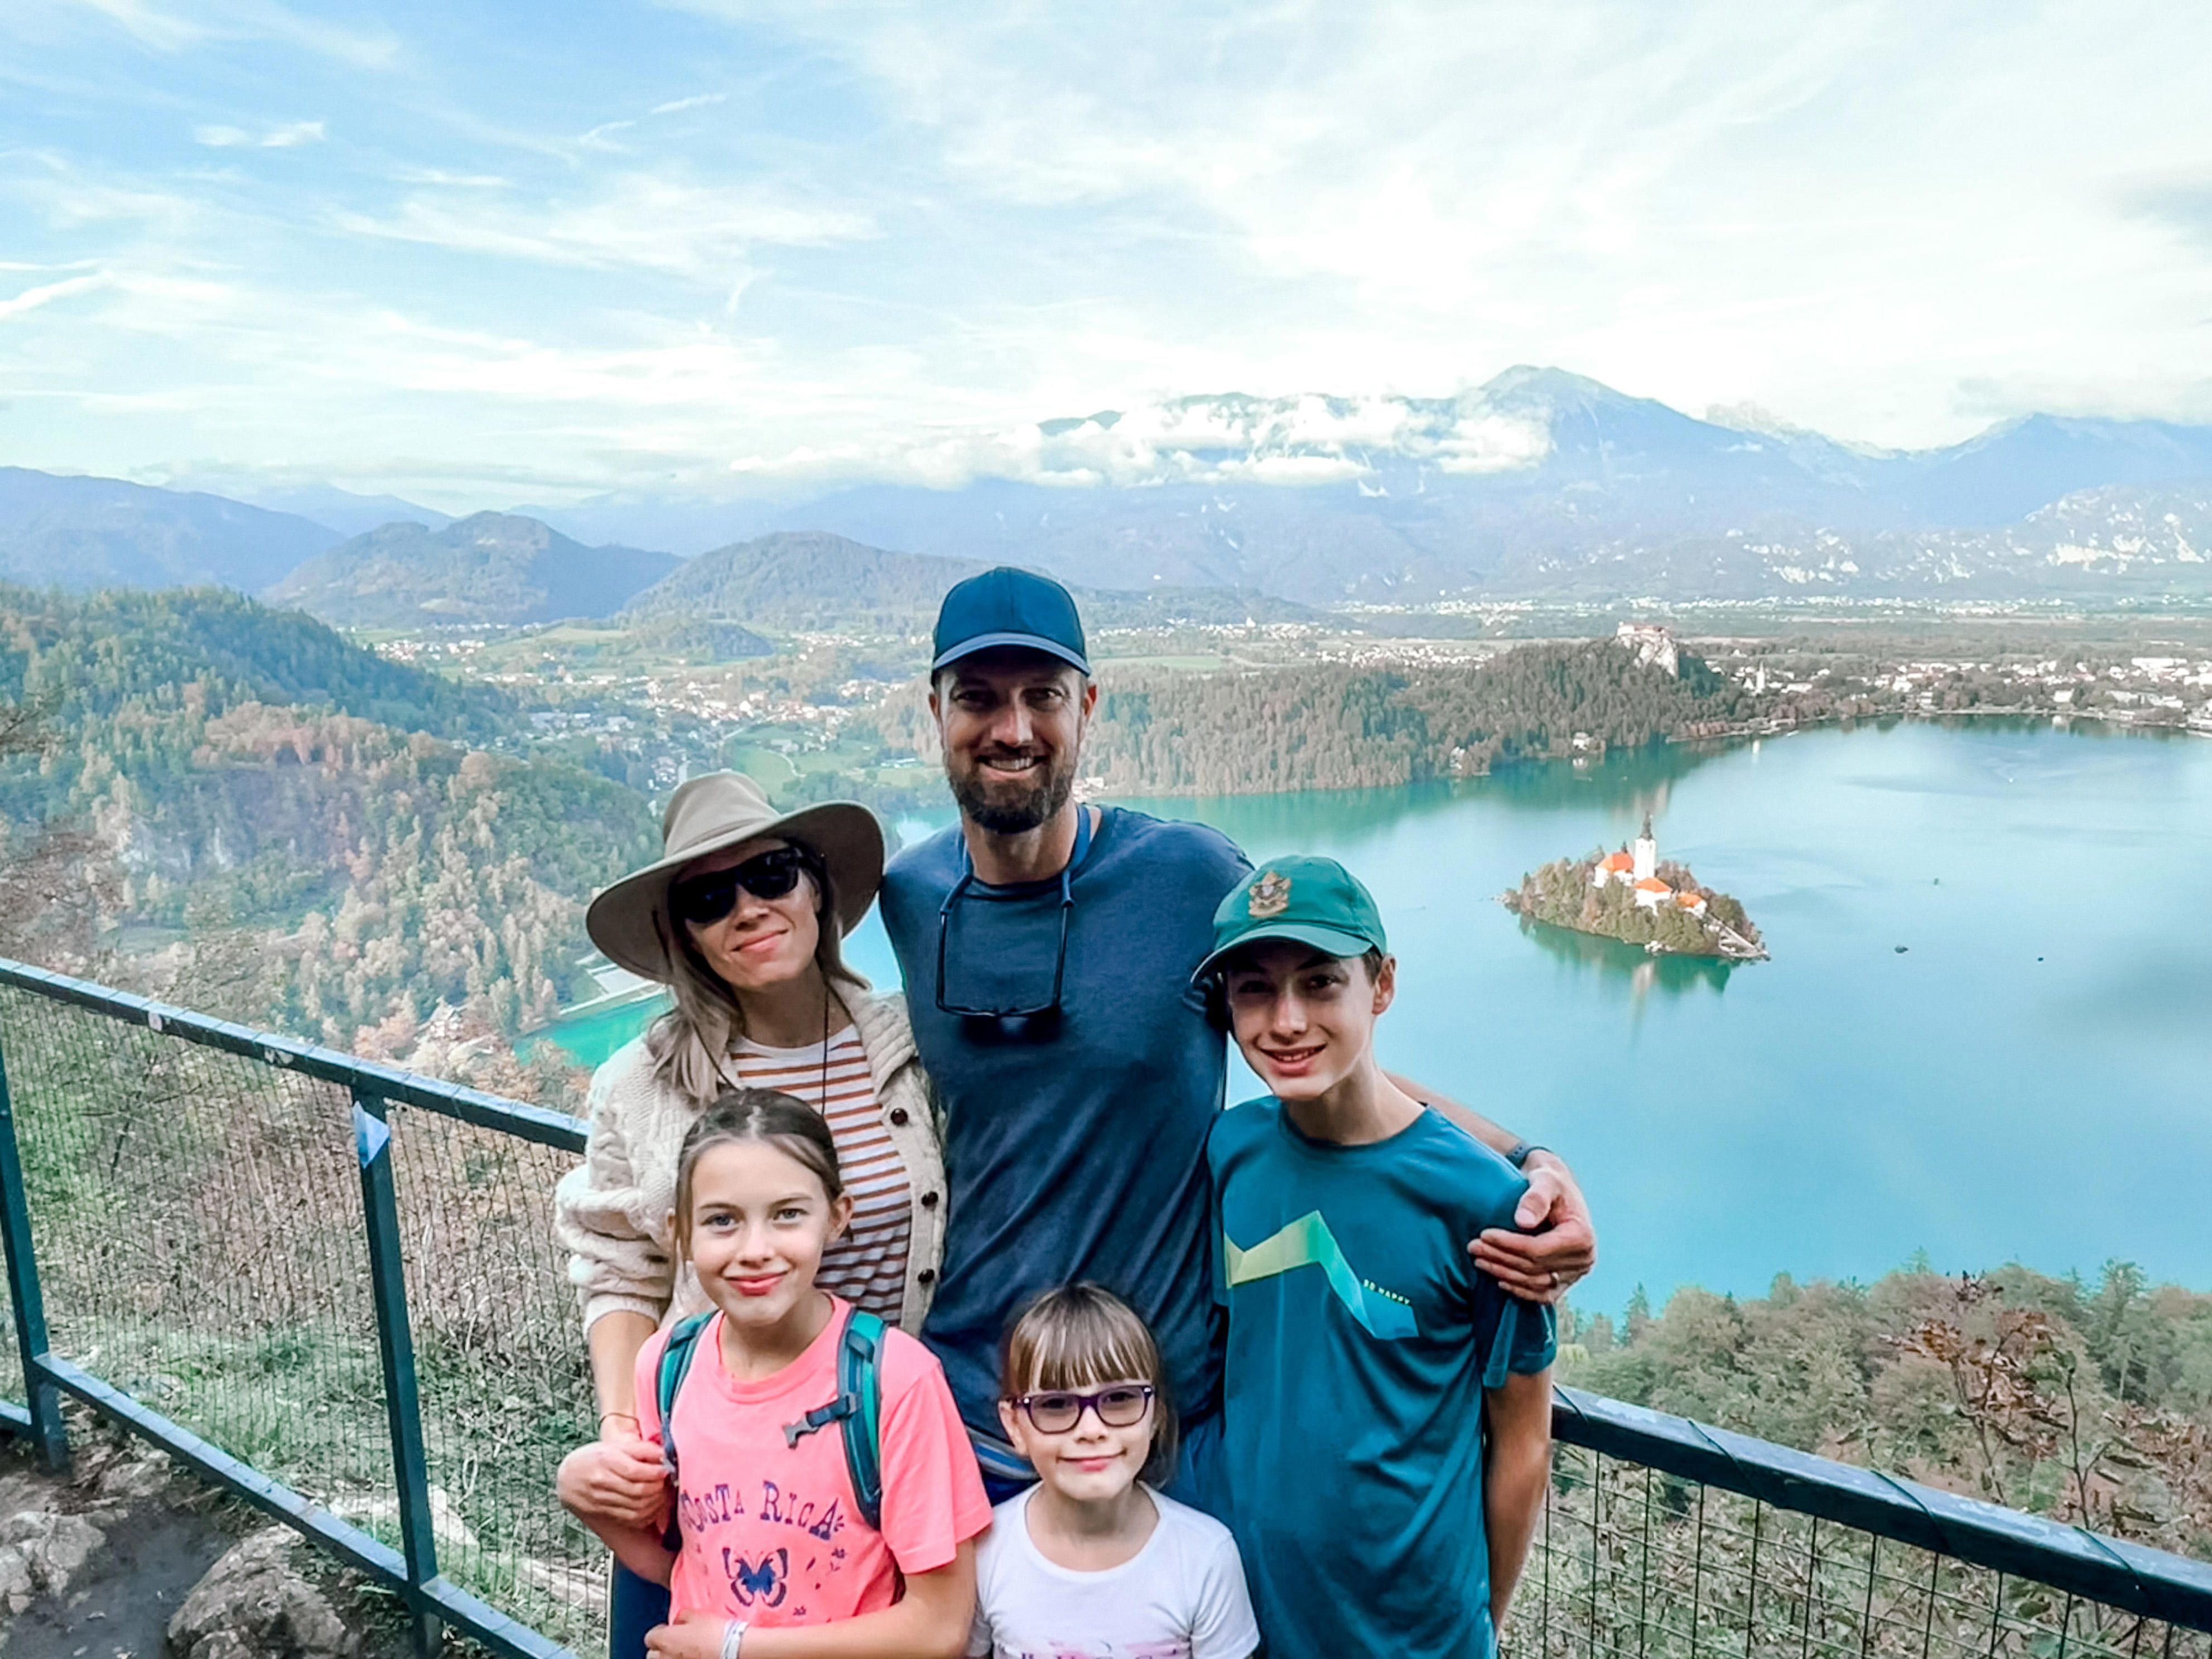 microsoft, some millennial and gen x parents are leaving it all behind to spend 6 figures on a family gap year. here's how they budget and 'worldschool' their kids.